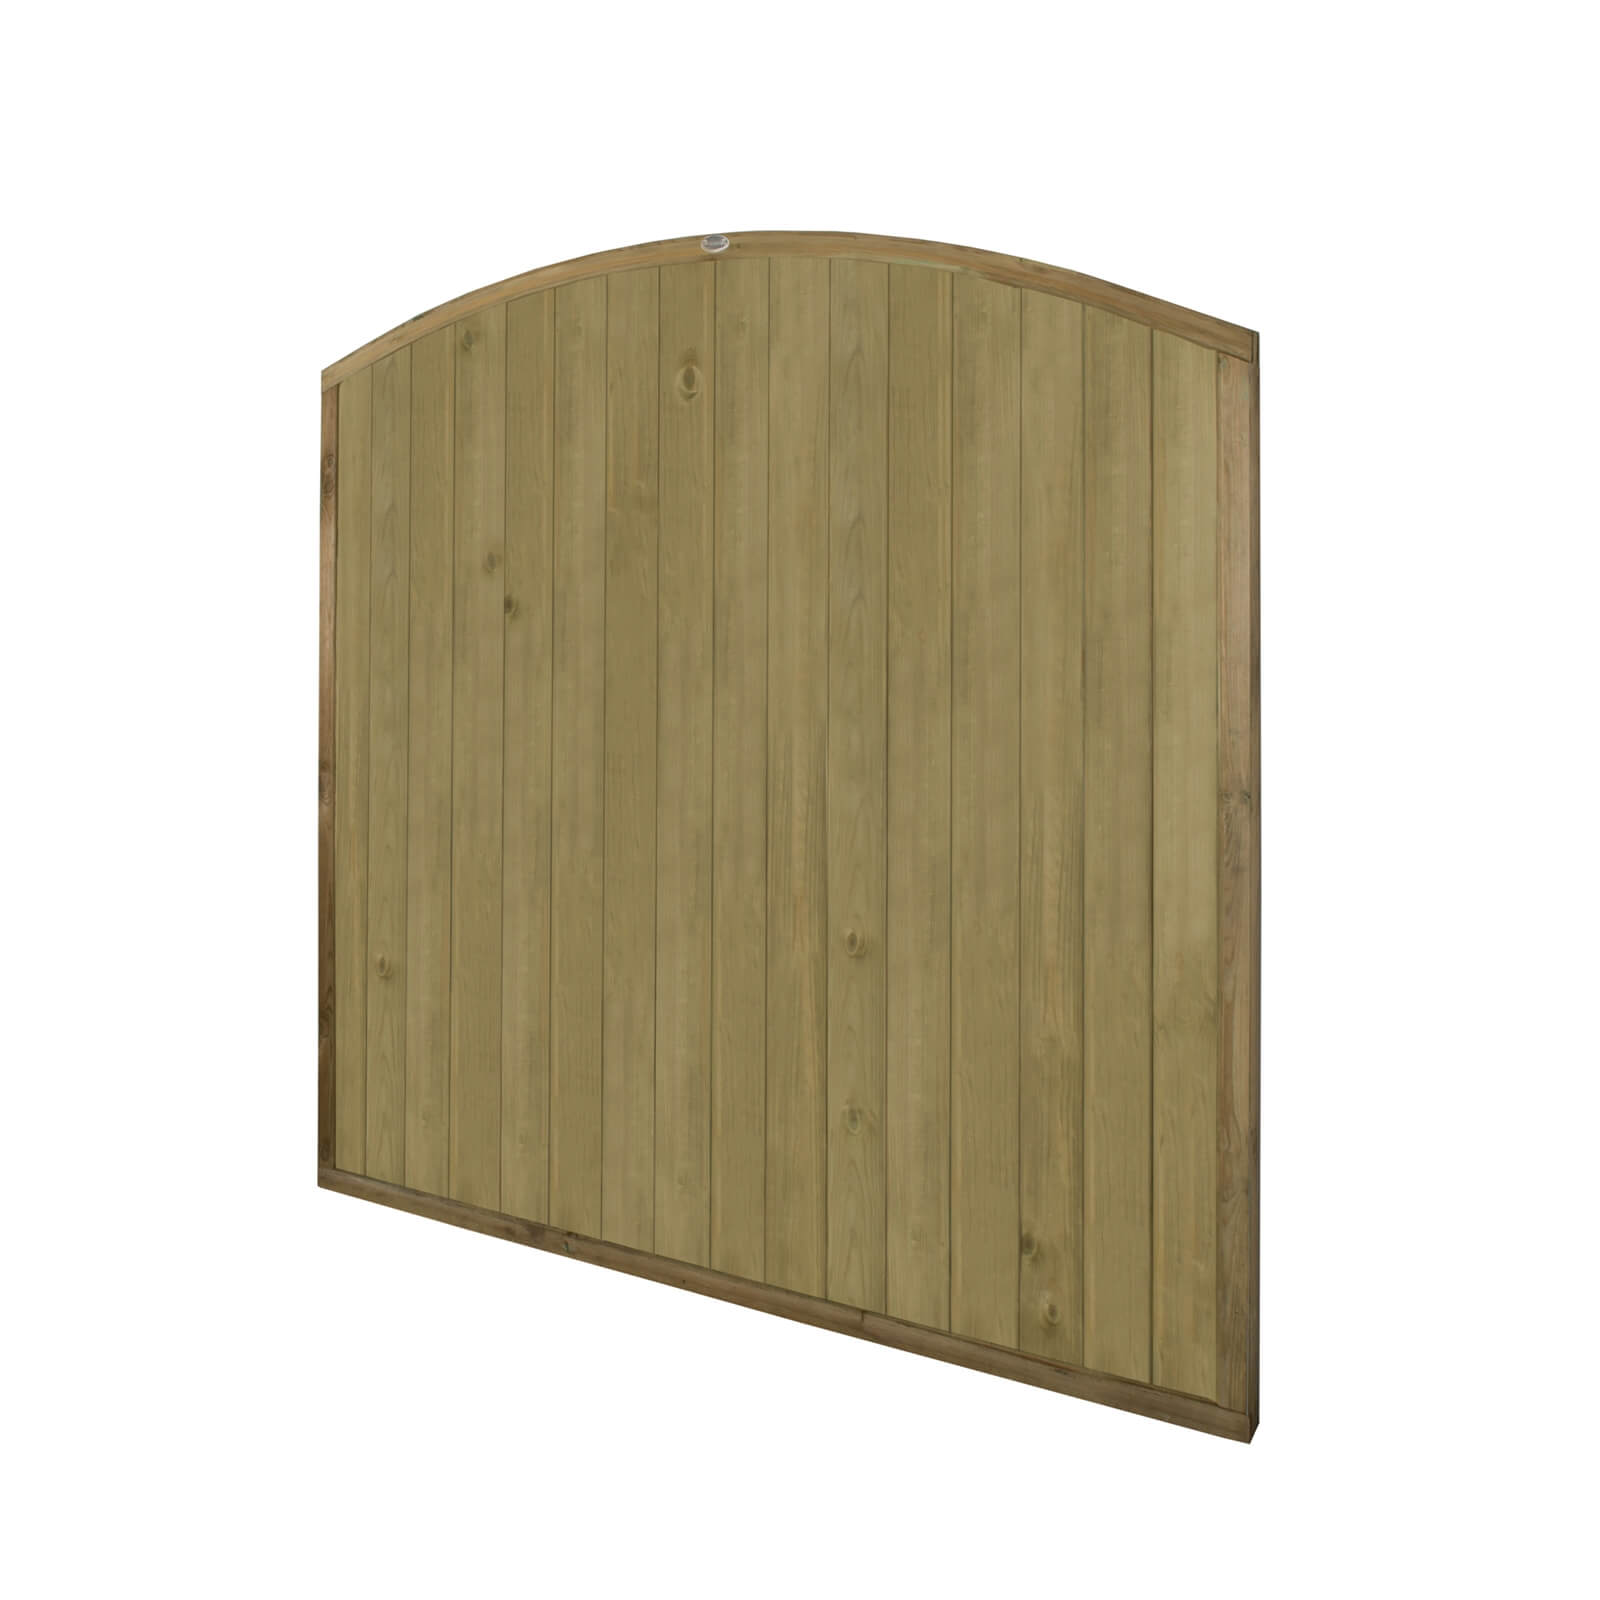 Forest Dome Tongue and Groove Panel - 6ft - Pack of 5